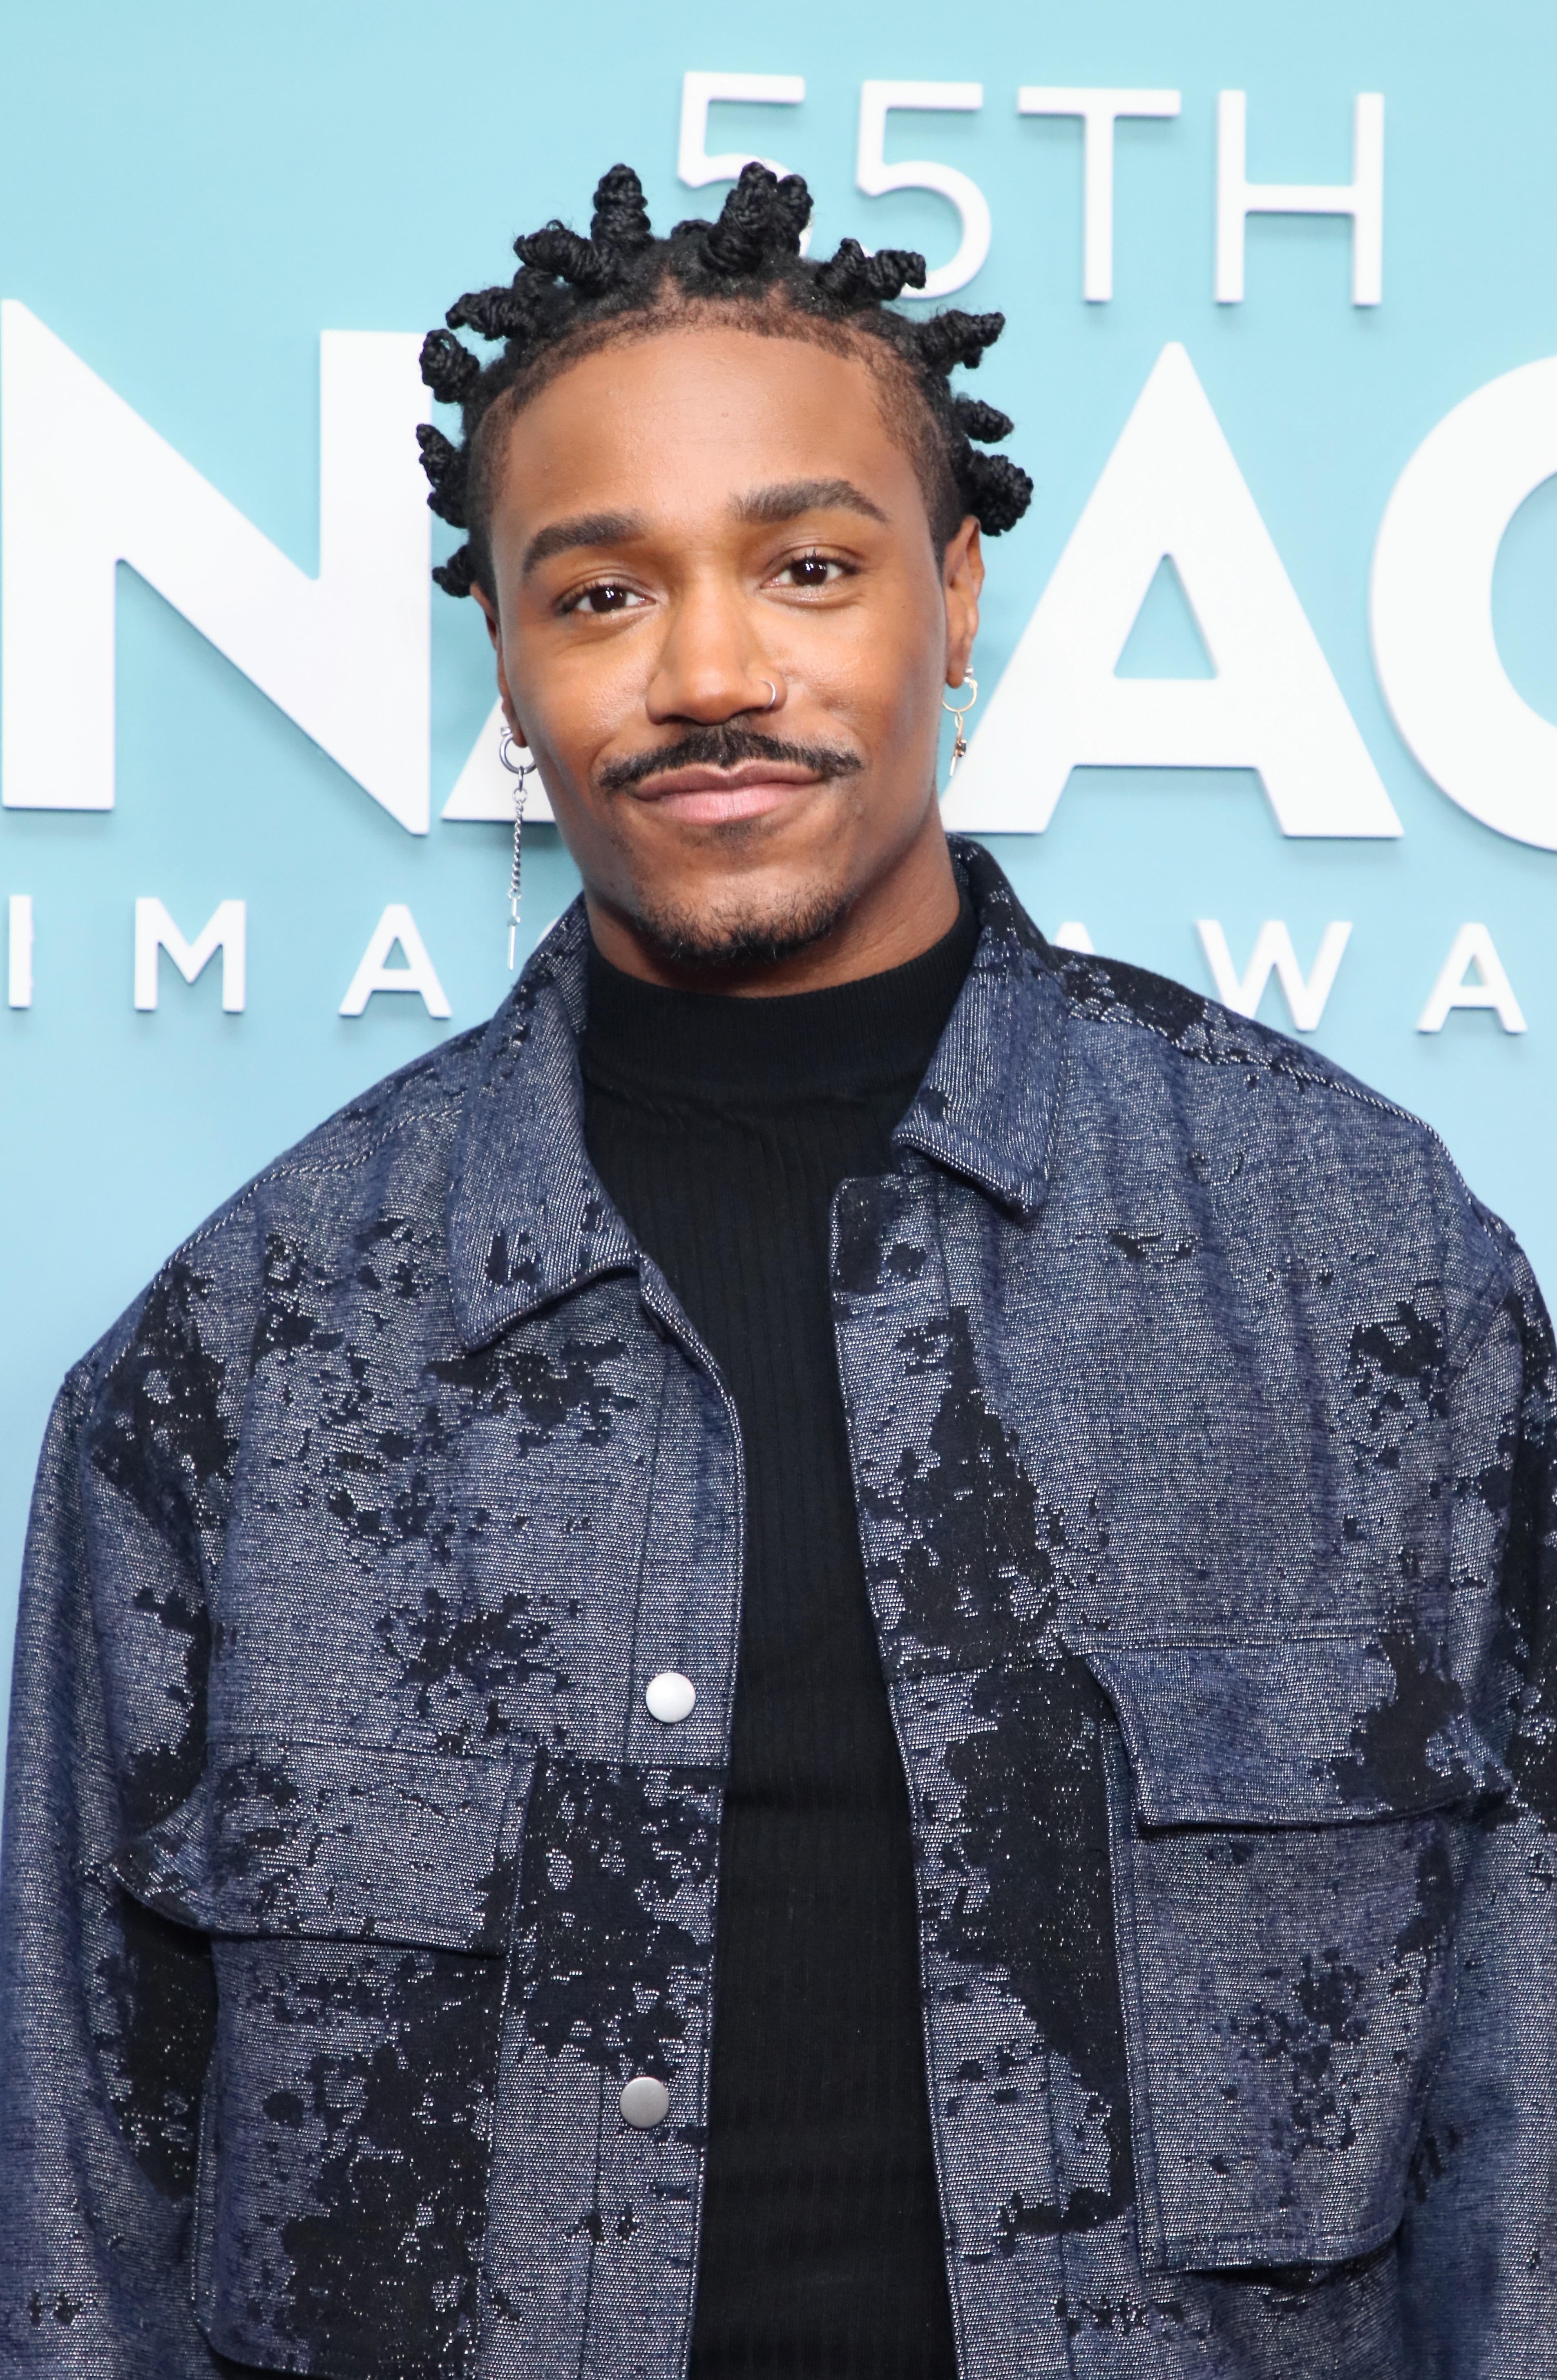 Dewayne rocks bantu knots while wearing in a turtleneck and textured denim jacket on the NAACP Image Awards red carpet